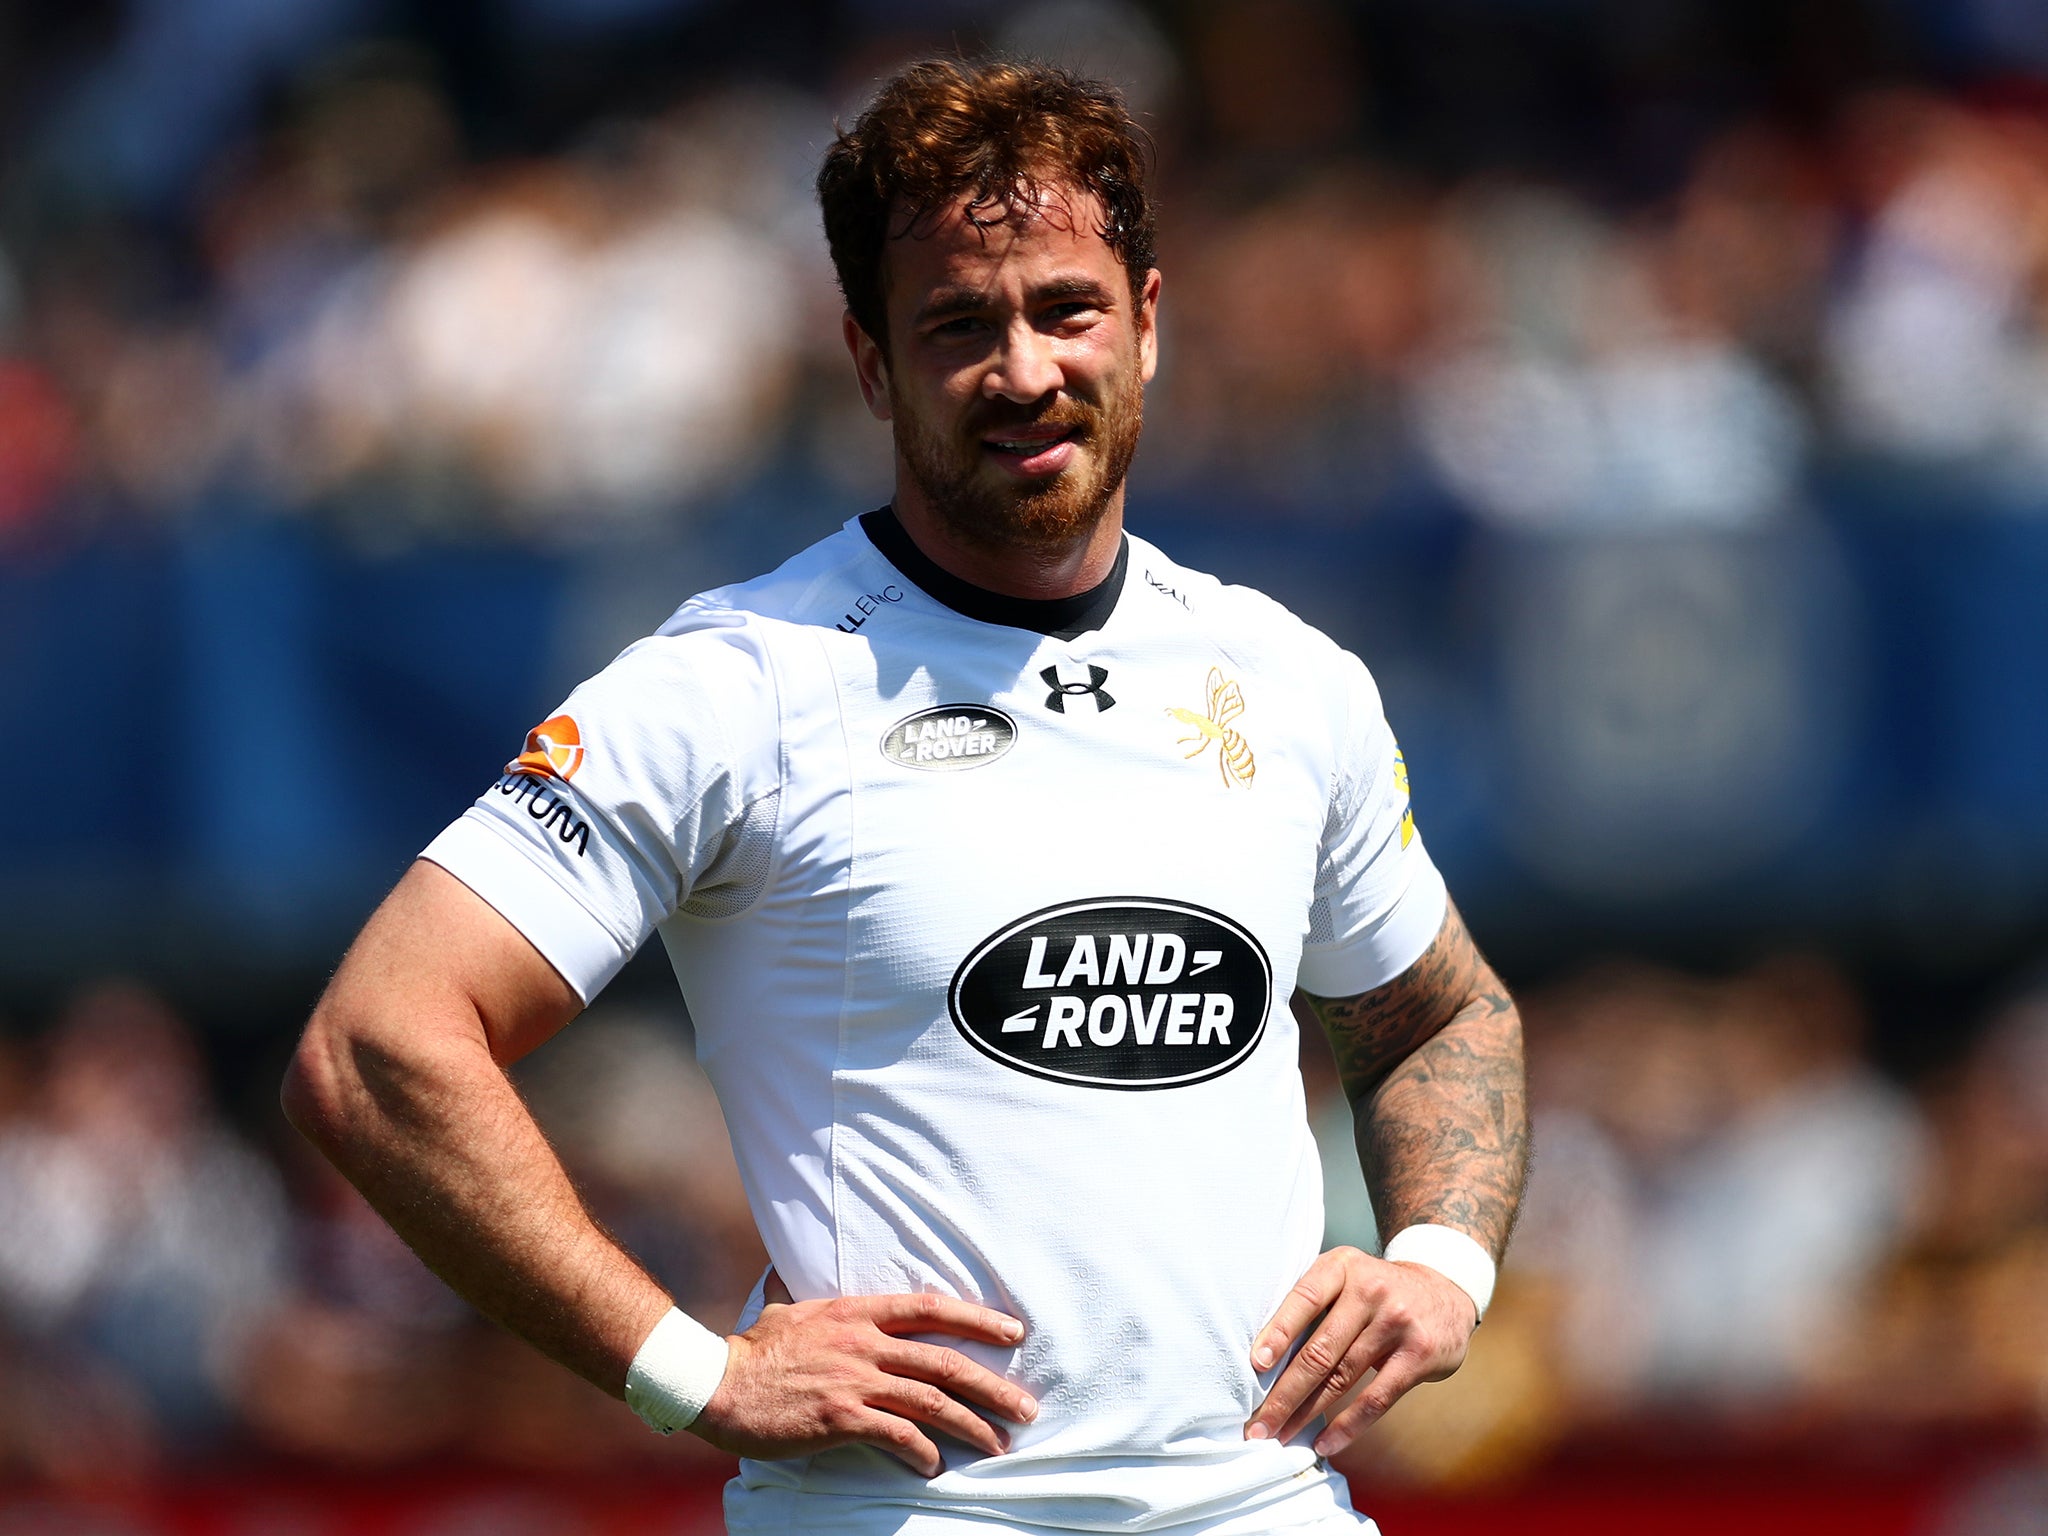 The defeat ended Danny Cipriani's Wasps career